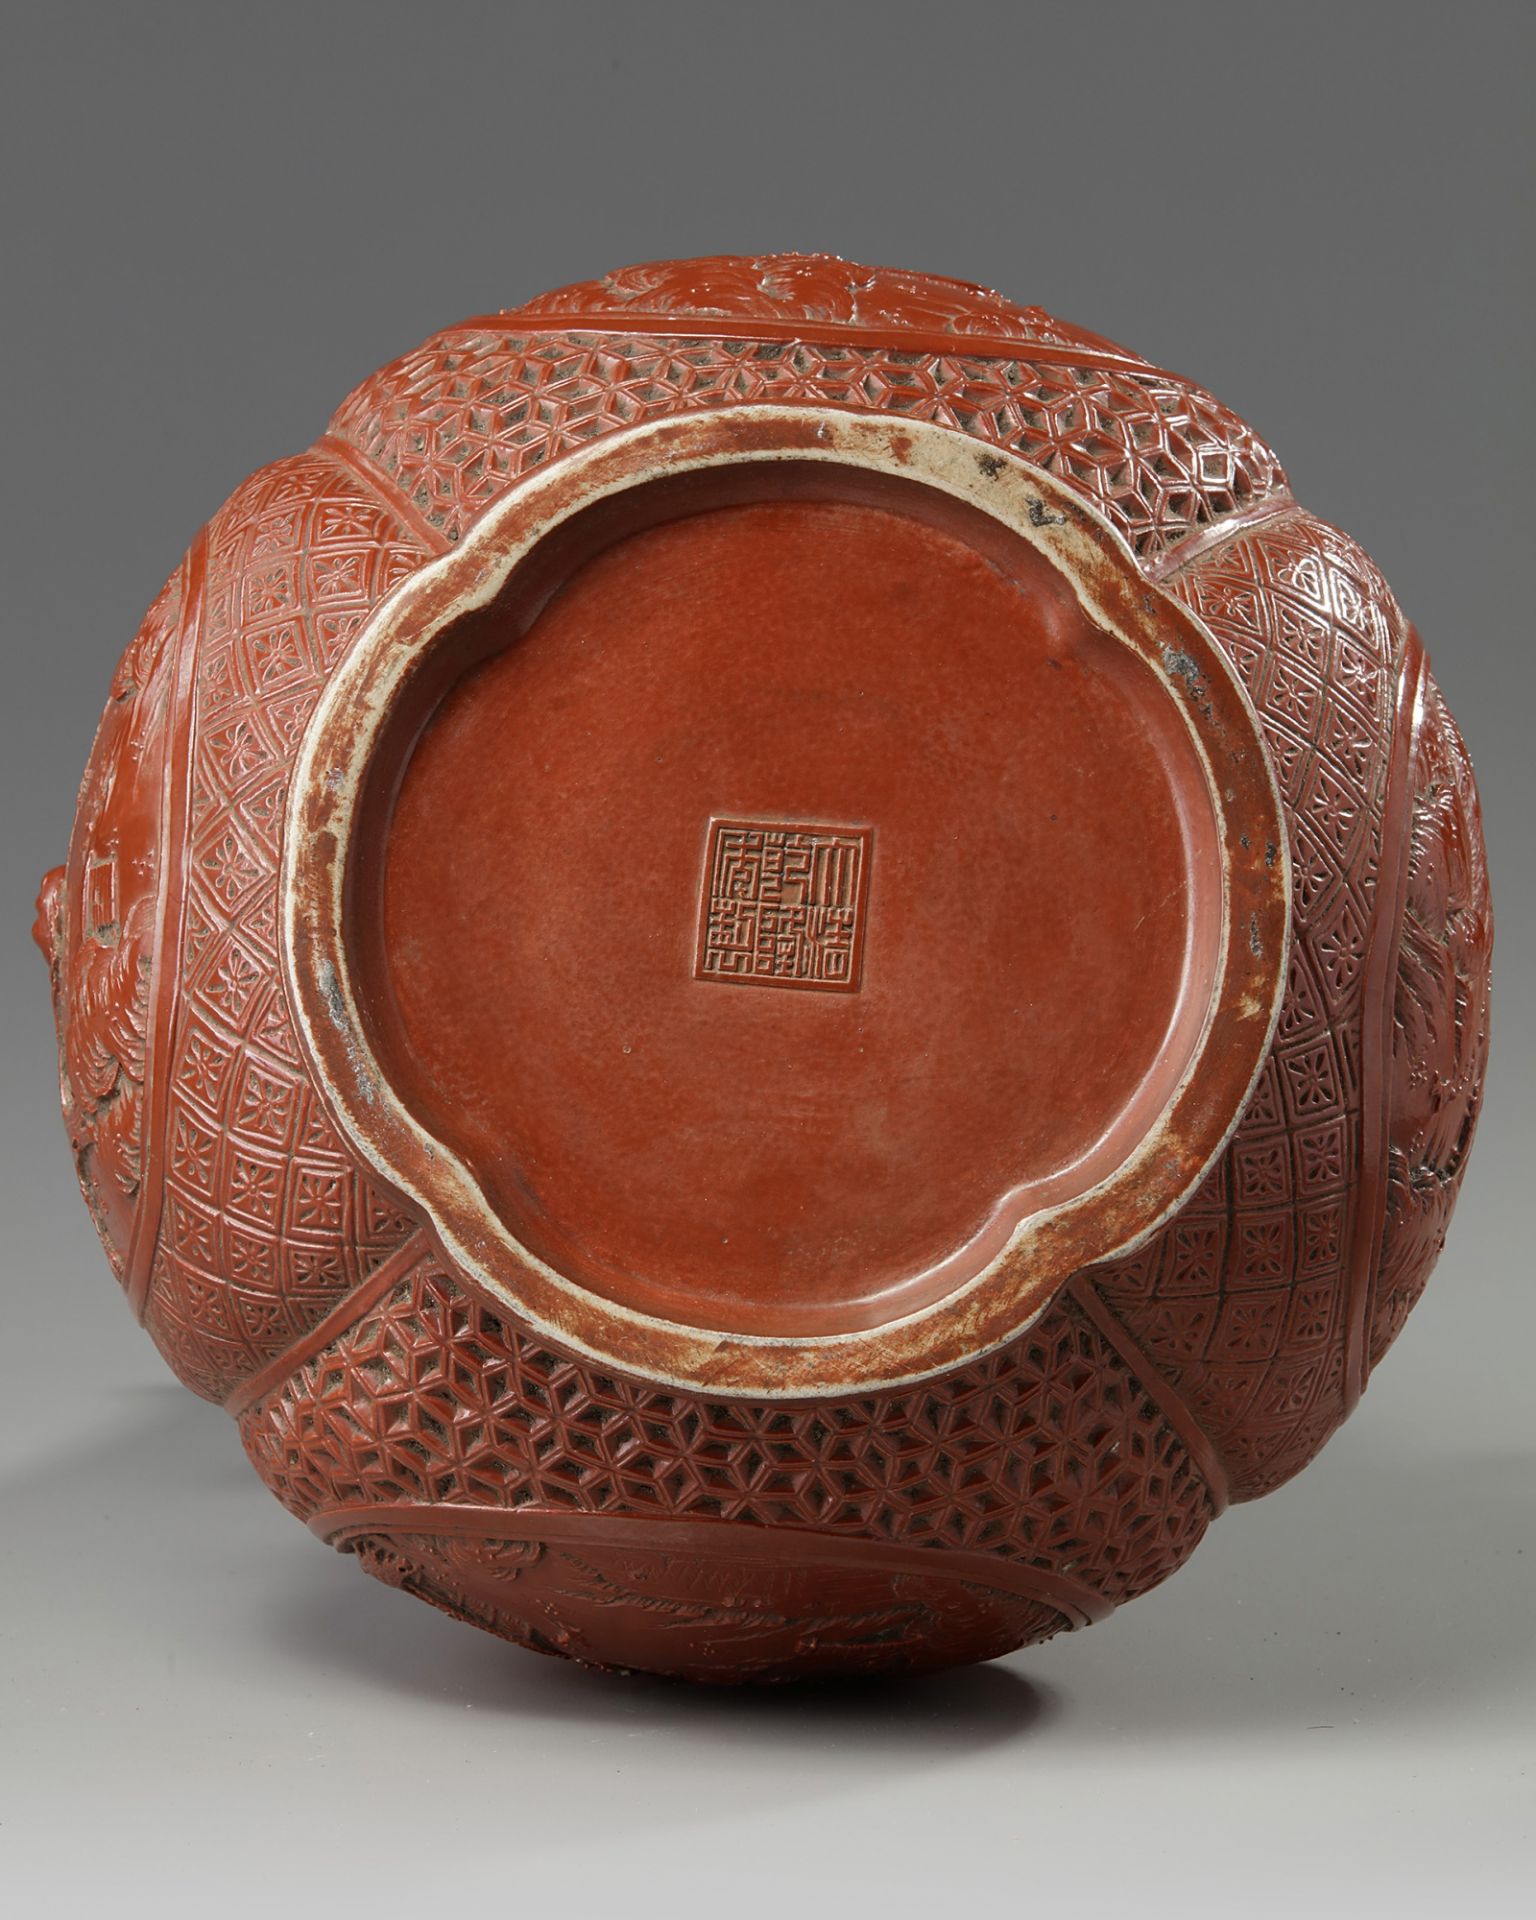 A Chinese imitation-cinnabar-lacquer double gourd vase - Image 6 of 6